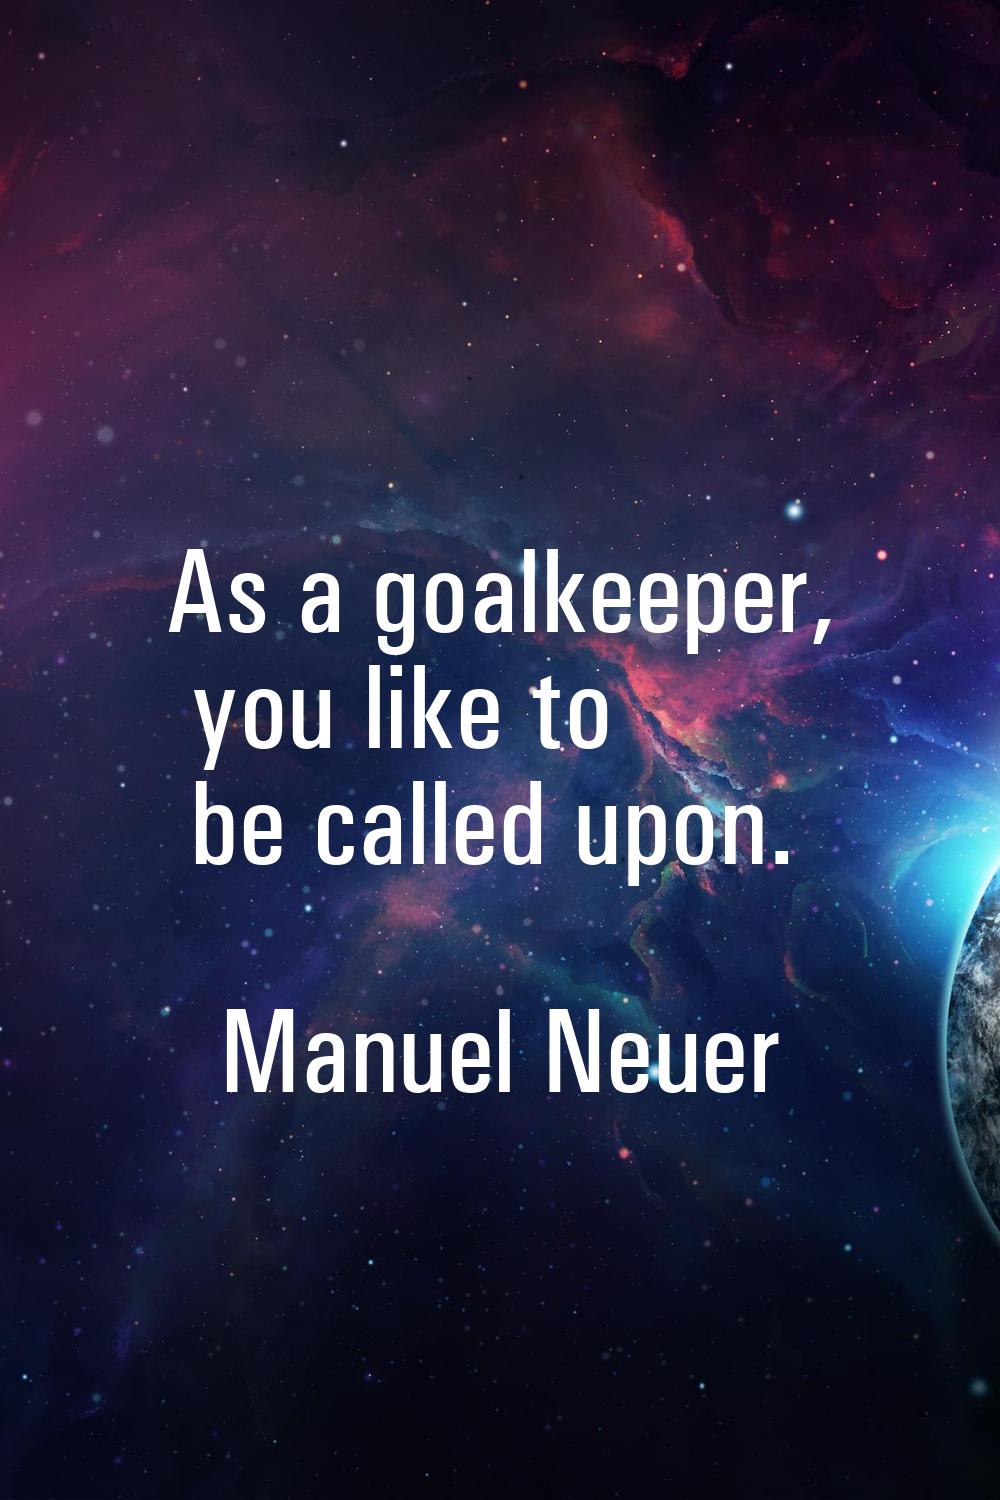 As a goalkeeper, you like to be called upon.